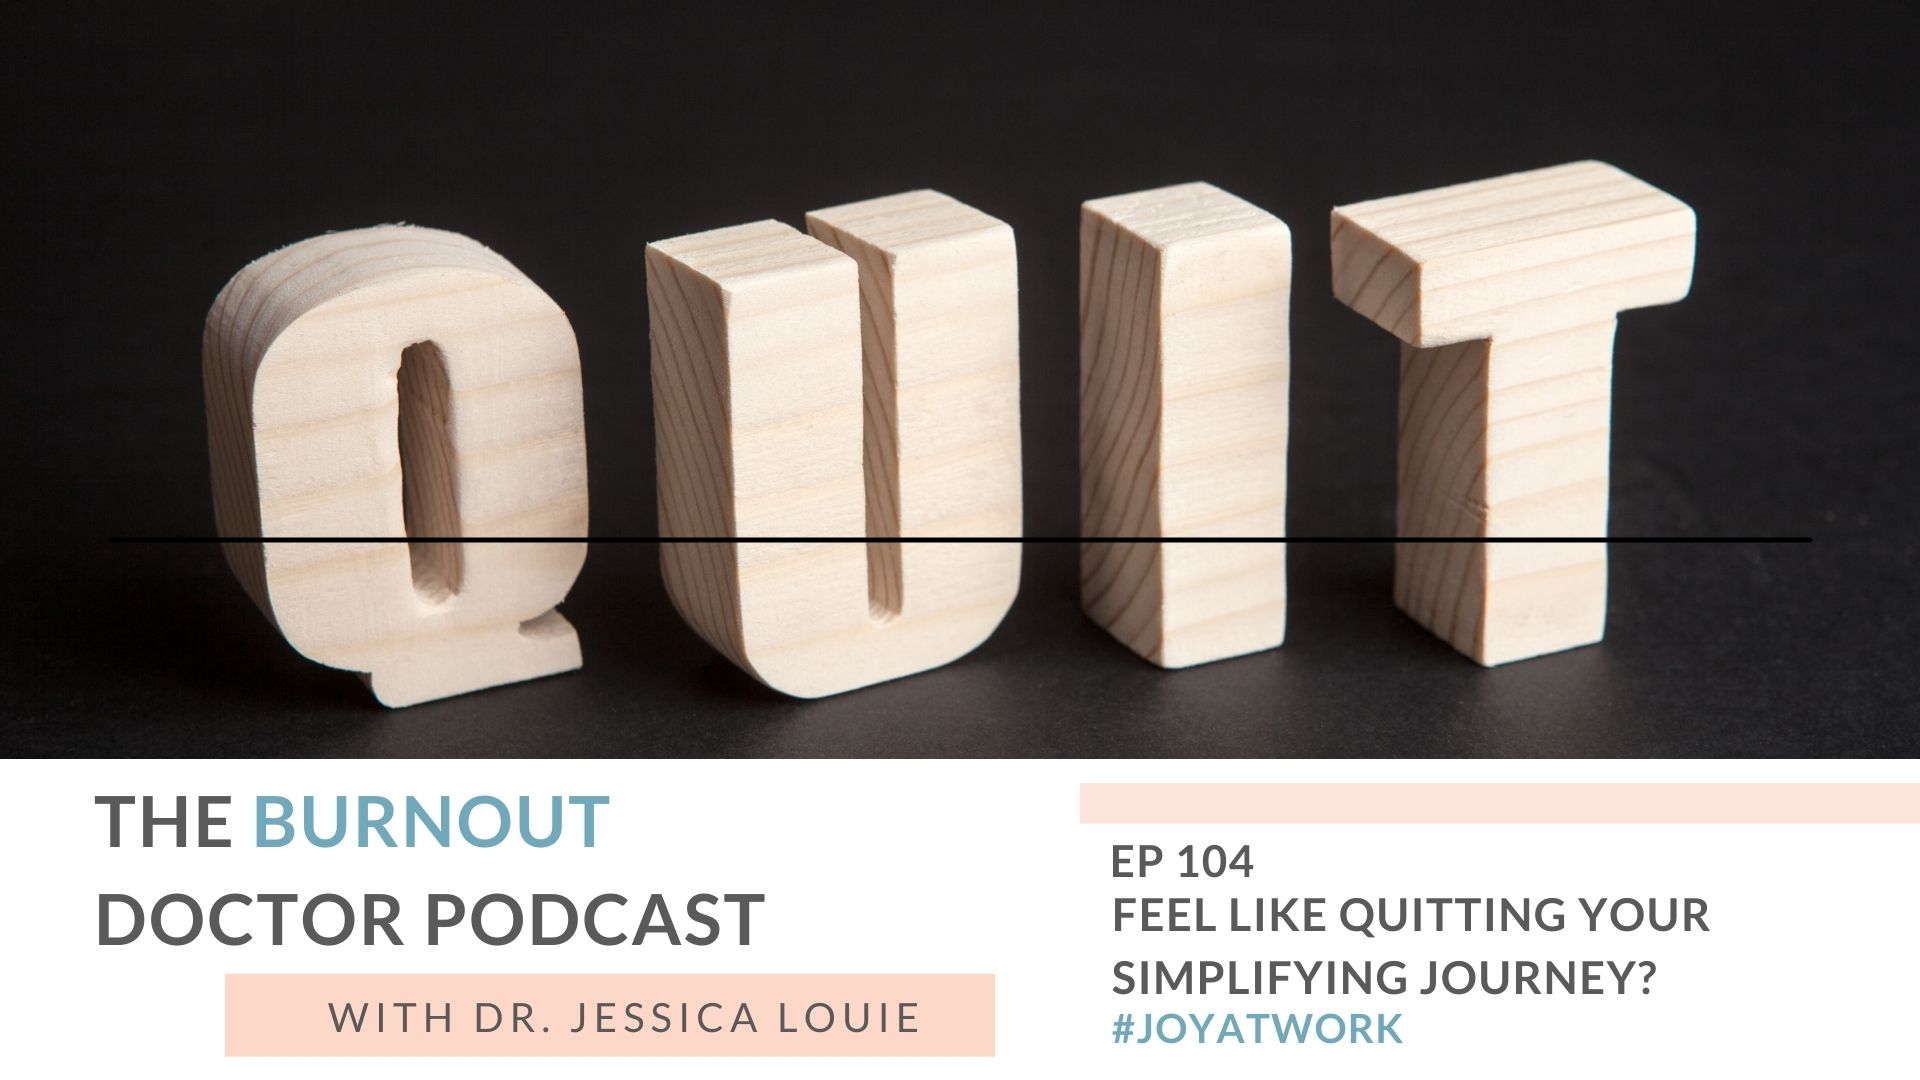 I quit the KonMari Method. What to do when you feel like quitting the KonMari Method. What to do when you feel like quitting minimalism. Simplifying journey. The Burnout Doctor Podcast. Dr. Jessica Louie.